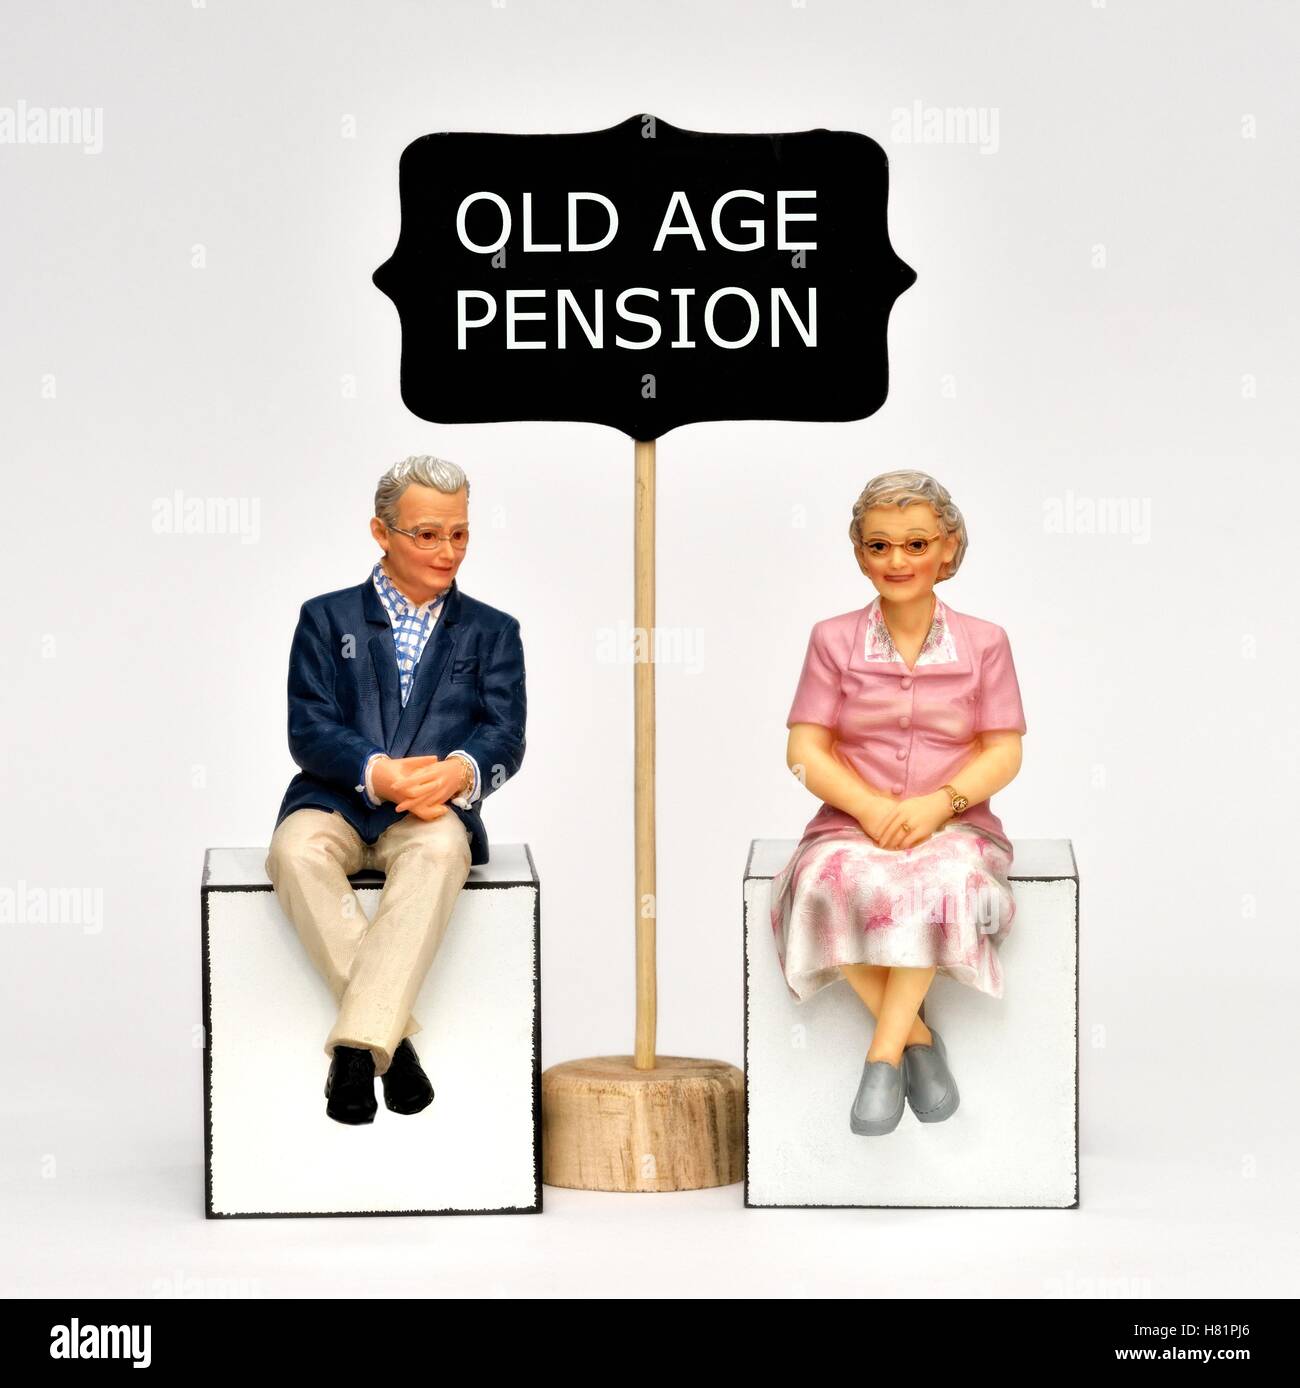 A figurine pensioner couple,old age pension. Stock Photo